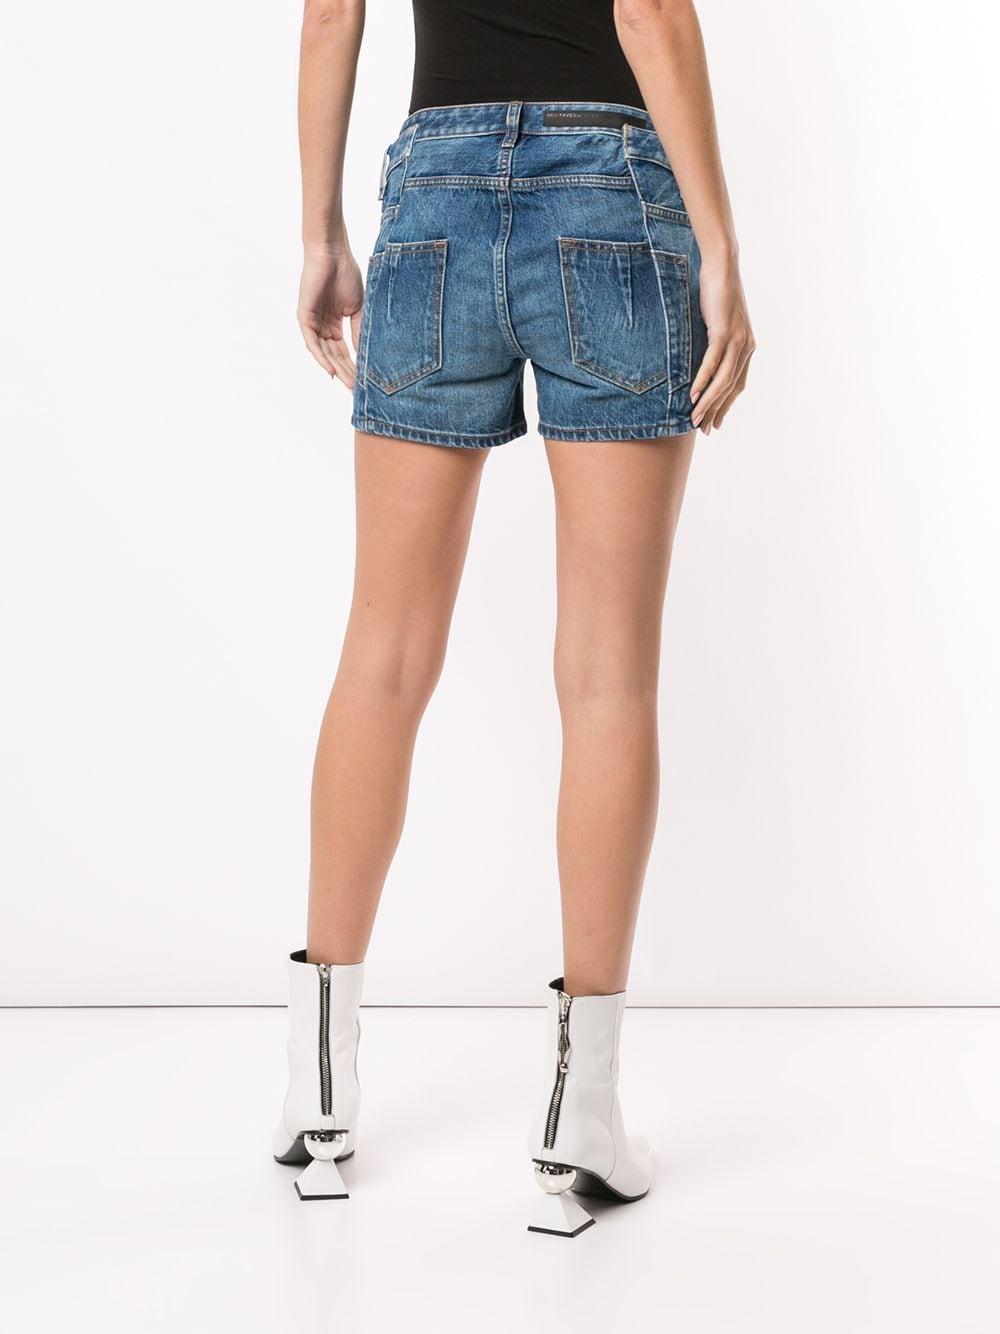 Unravel Project Lace-up Denim Shorts in Blue - Lyst